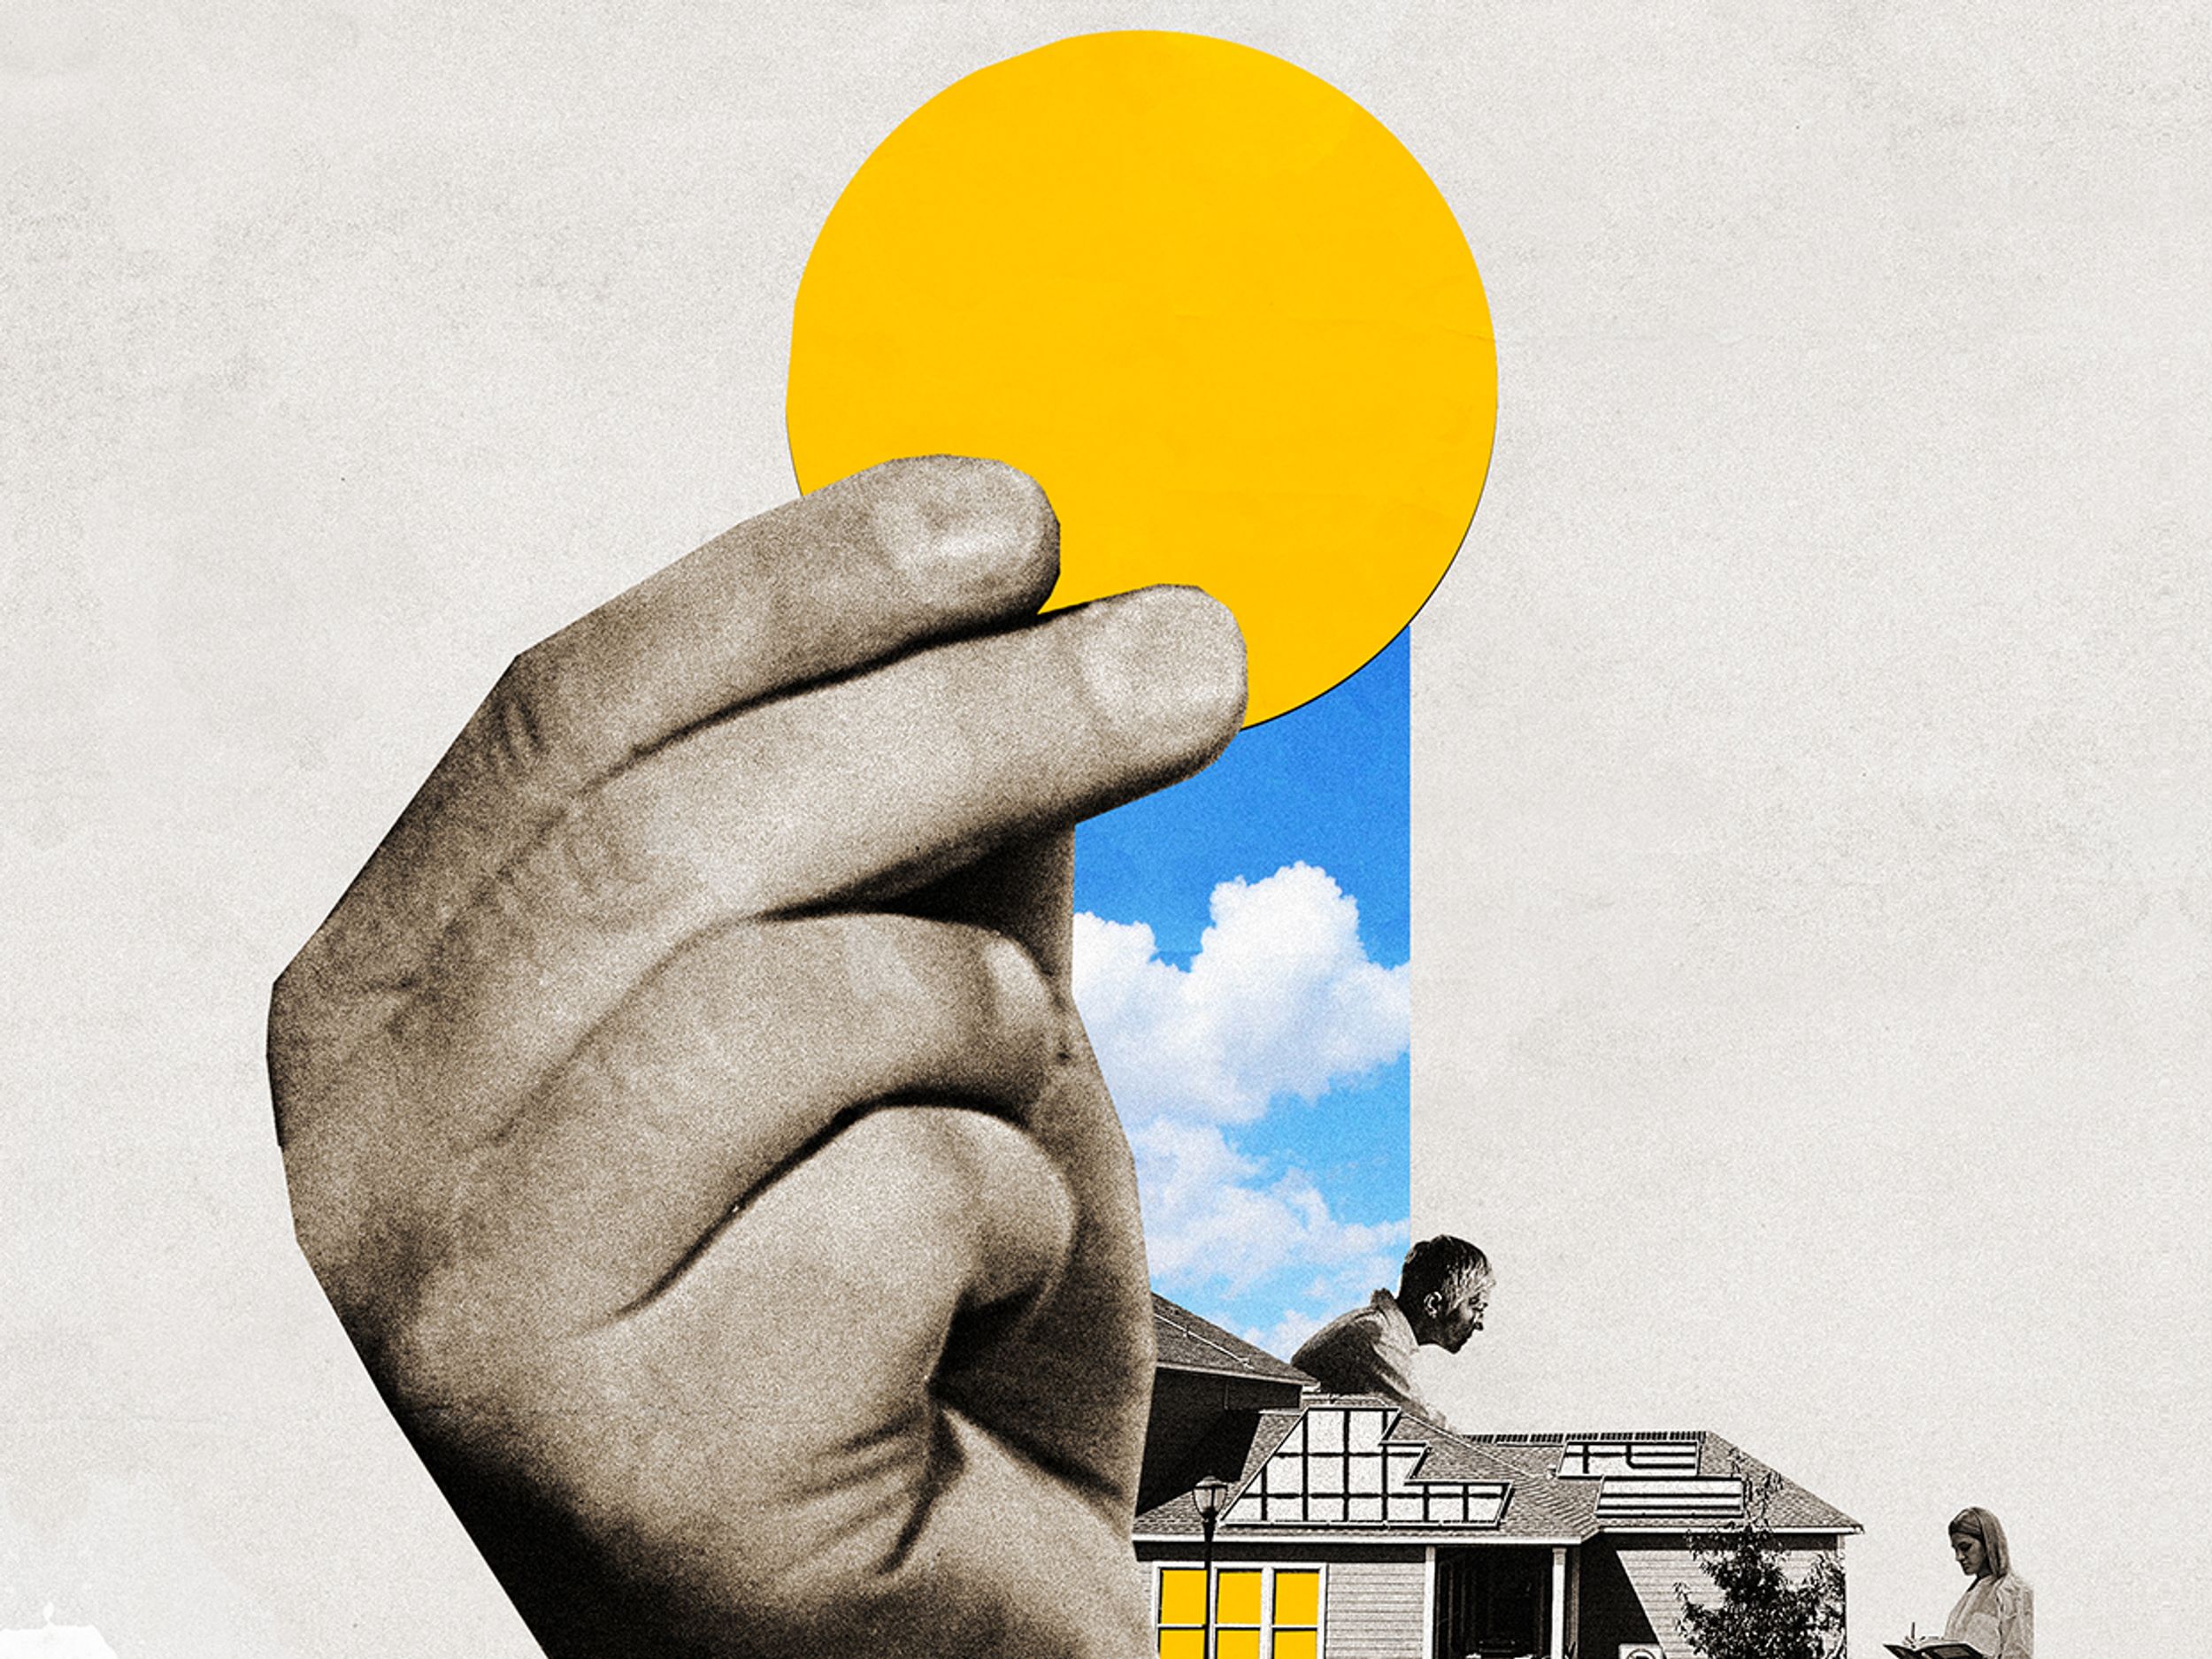 Photo-illustration of a hand holding the sun with neighborhood homes and engineers in background.